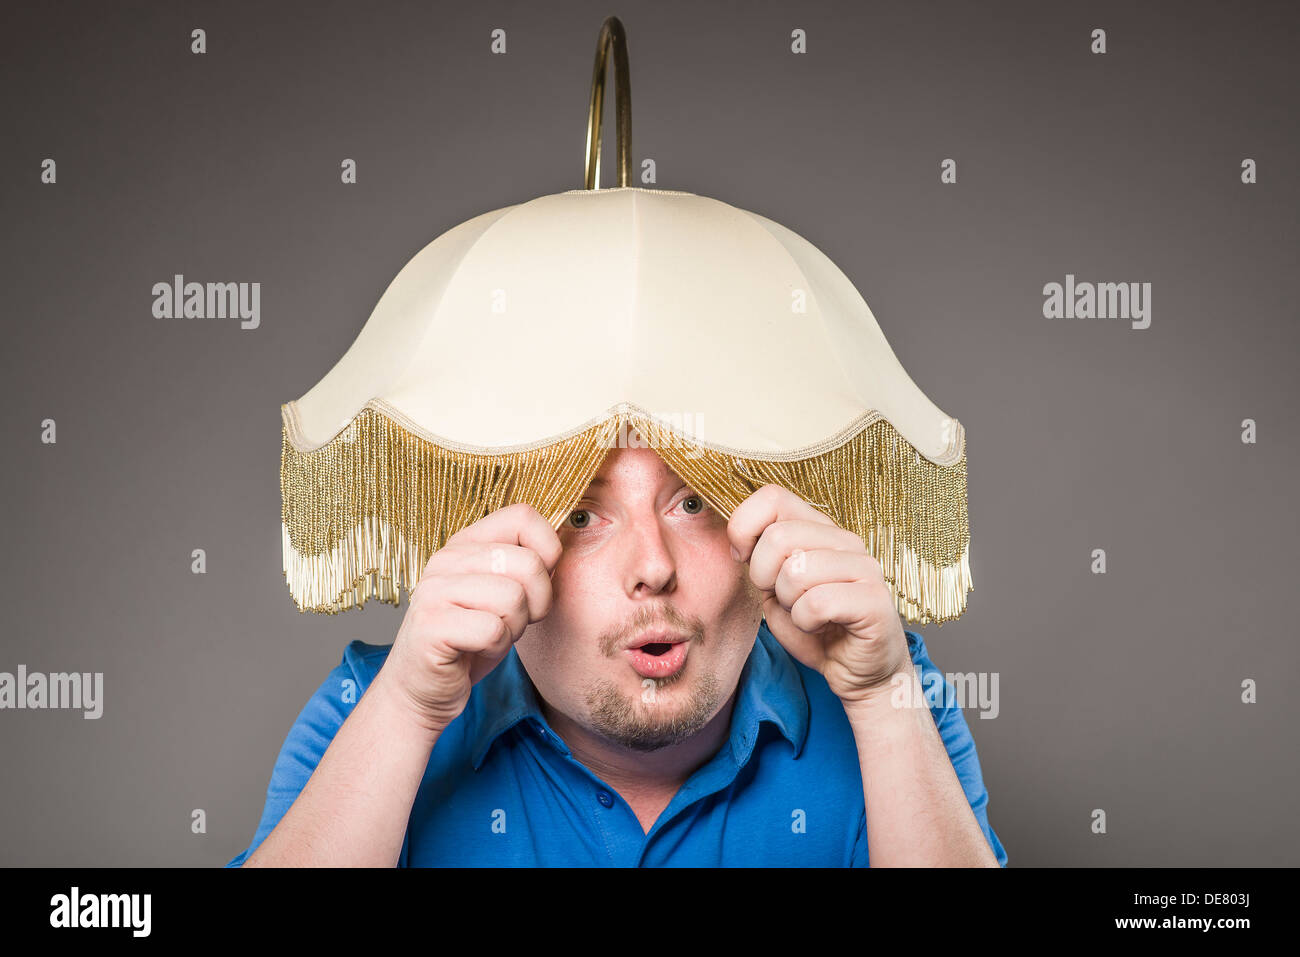 Portrait of mid adult man with electric lamp, close up Stock Photo